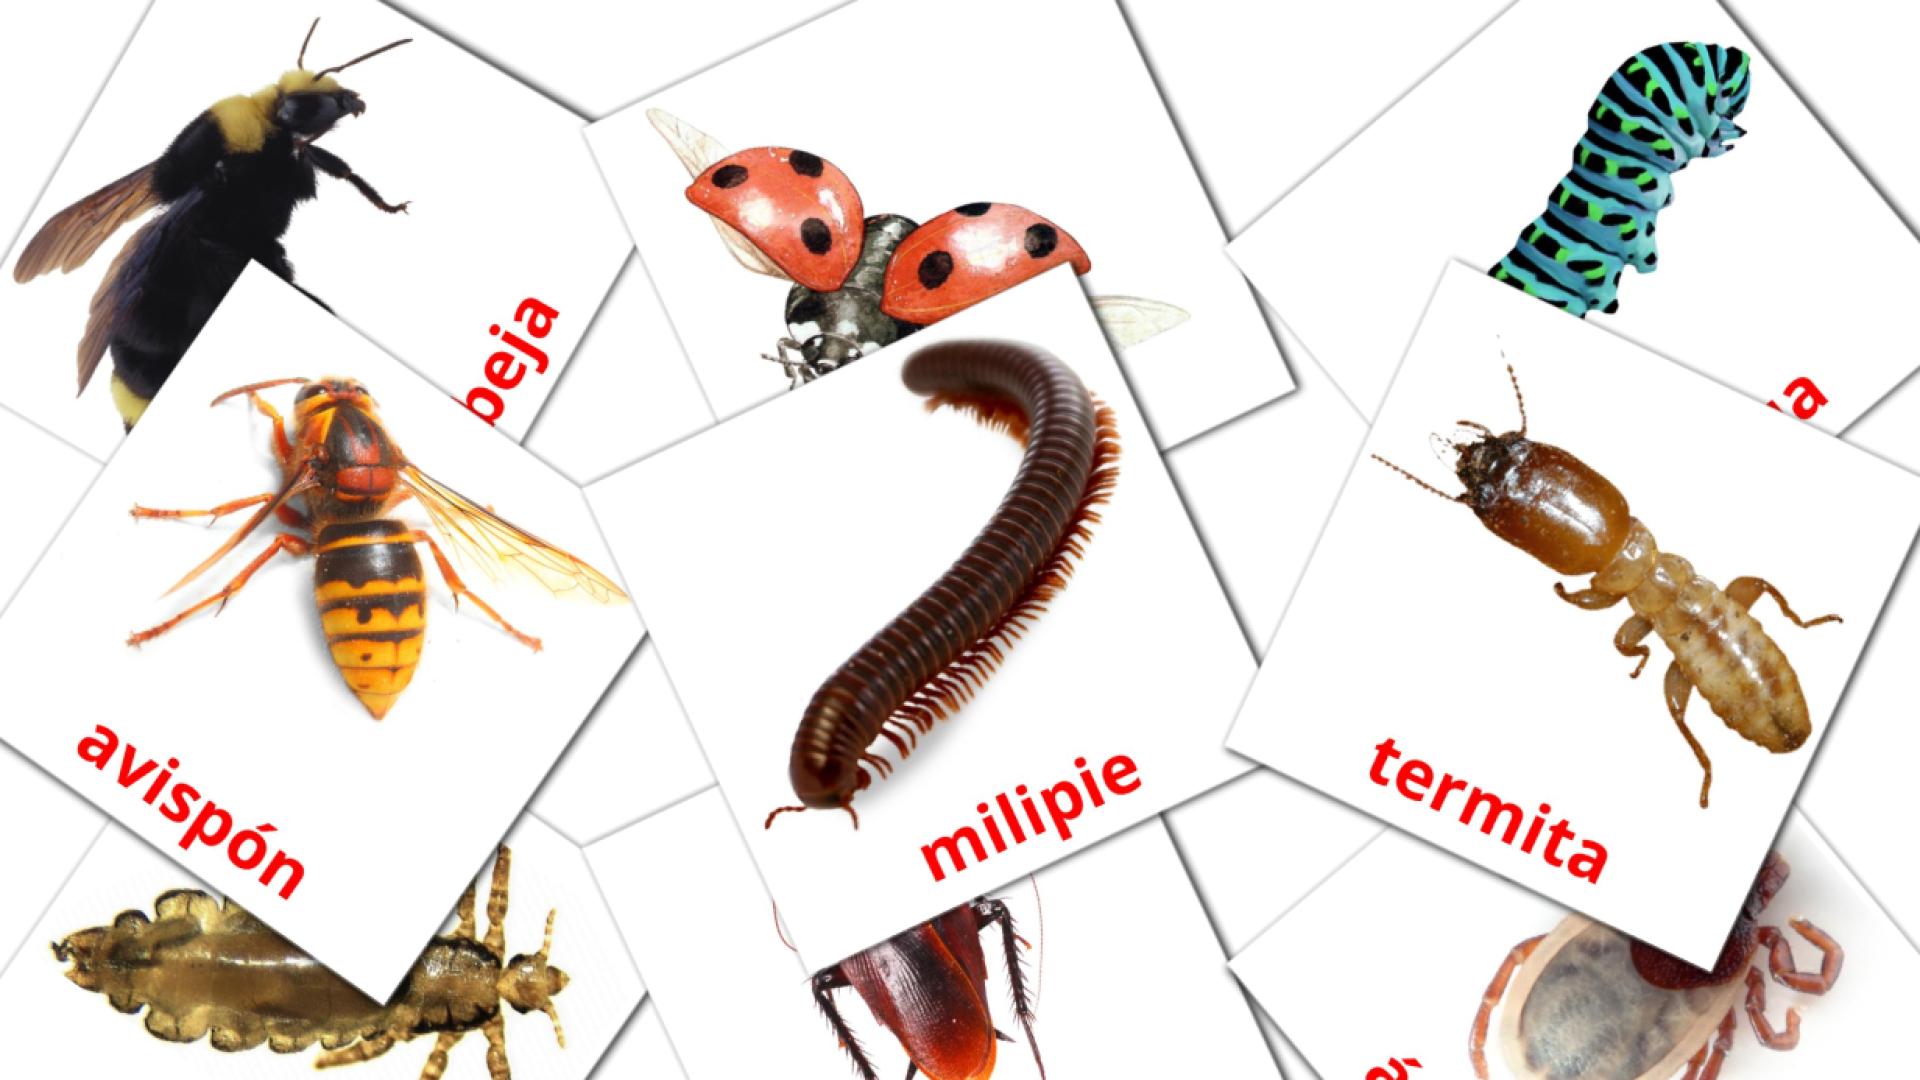 23 Insectos flashcards